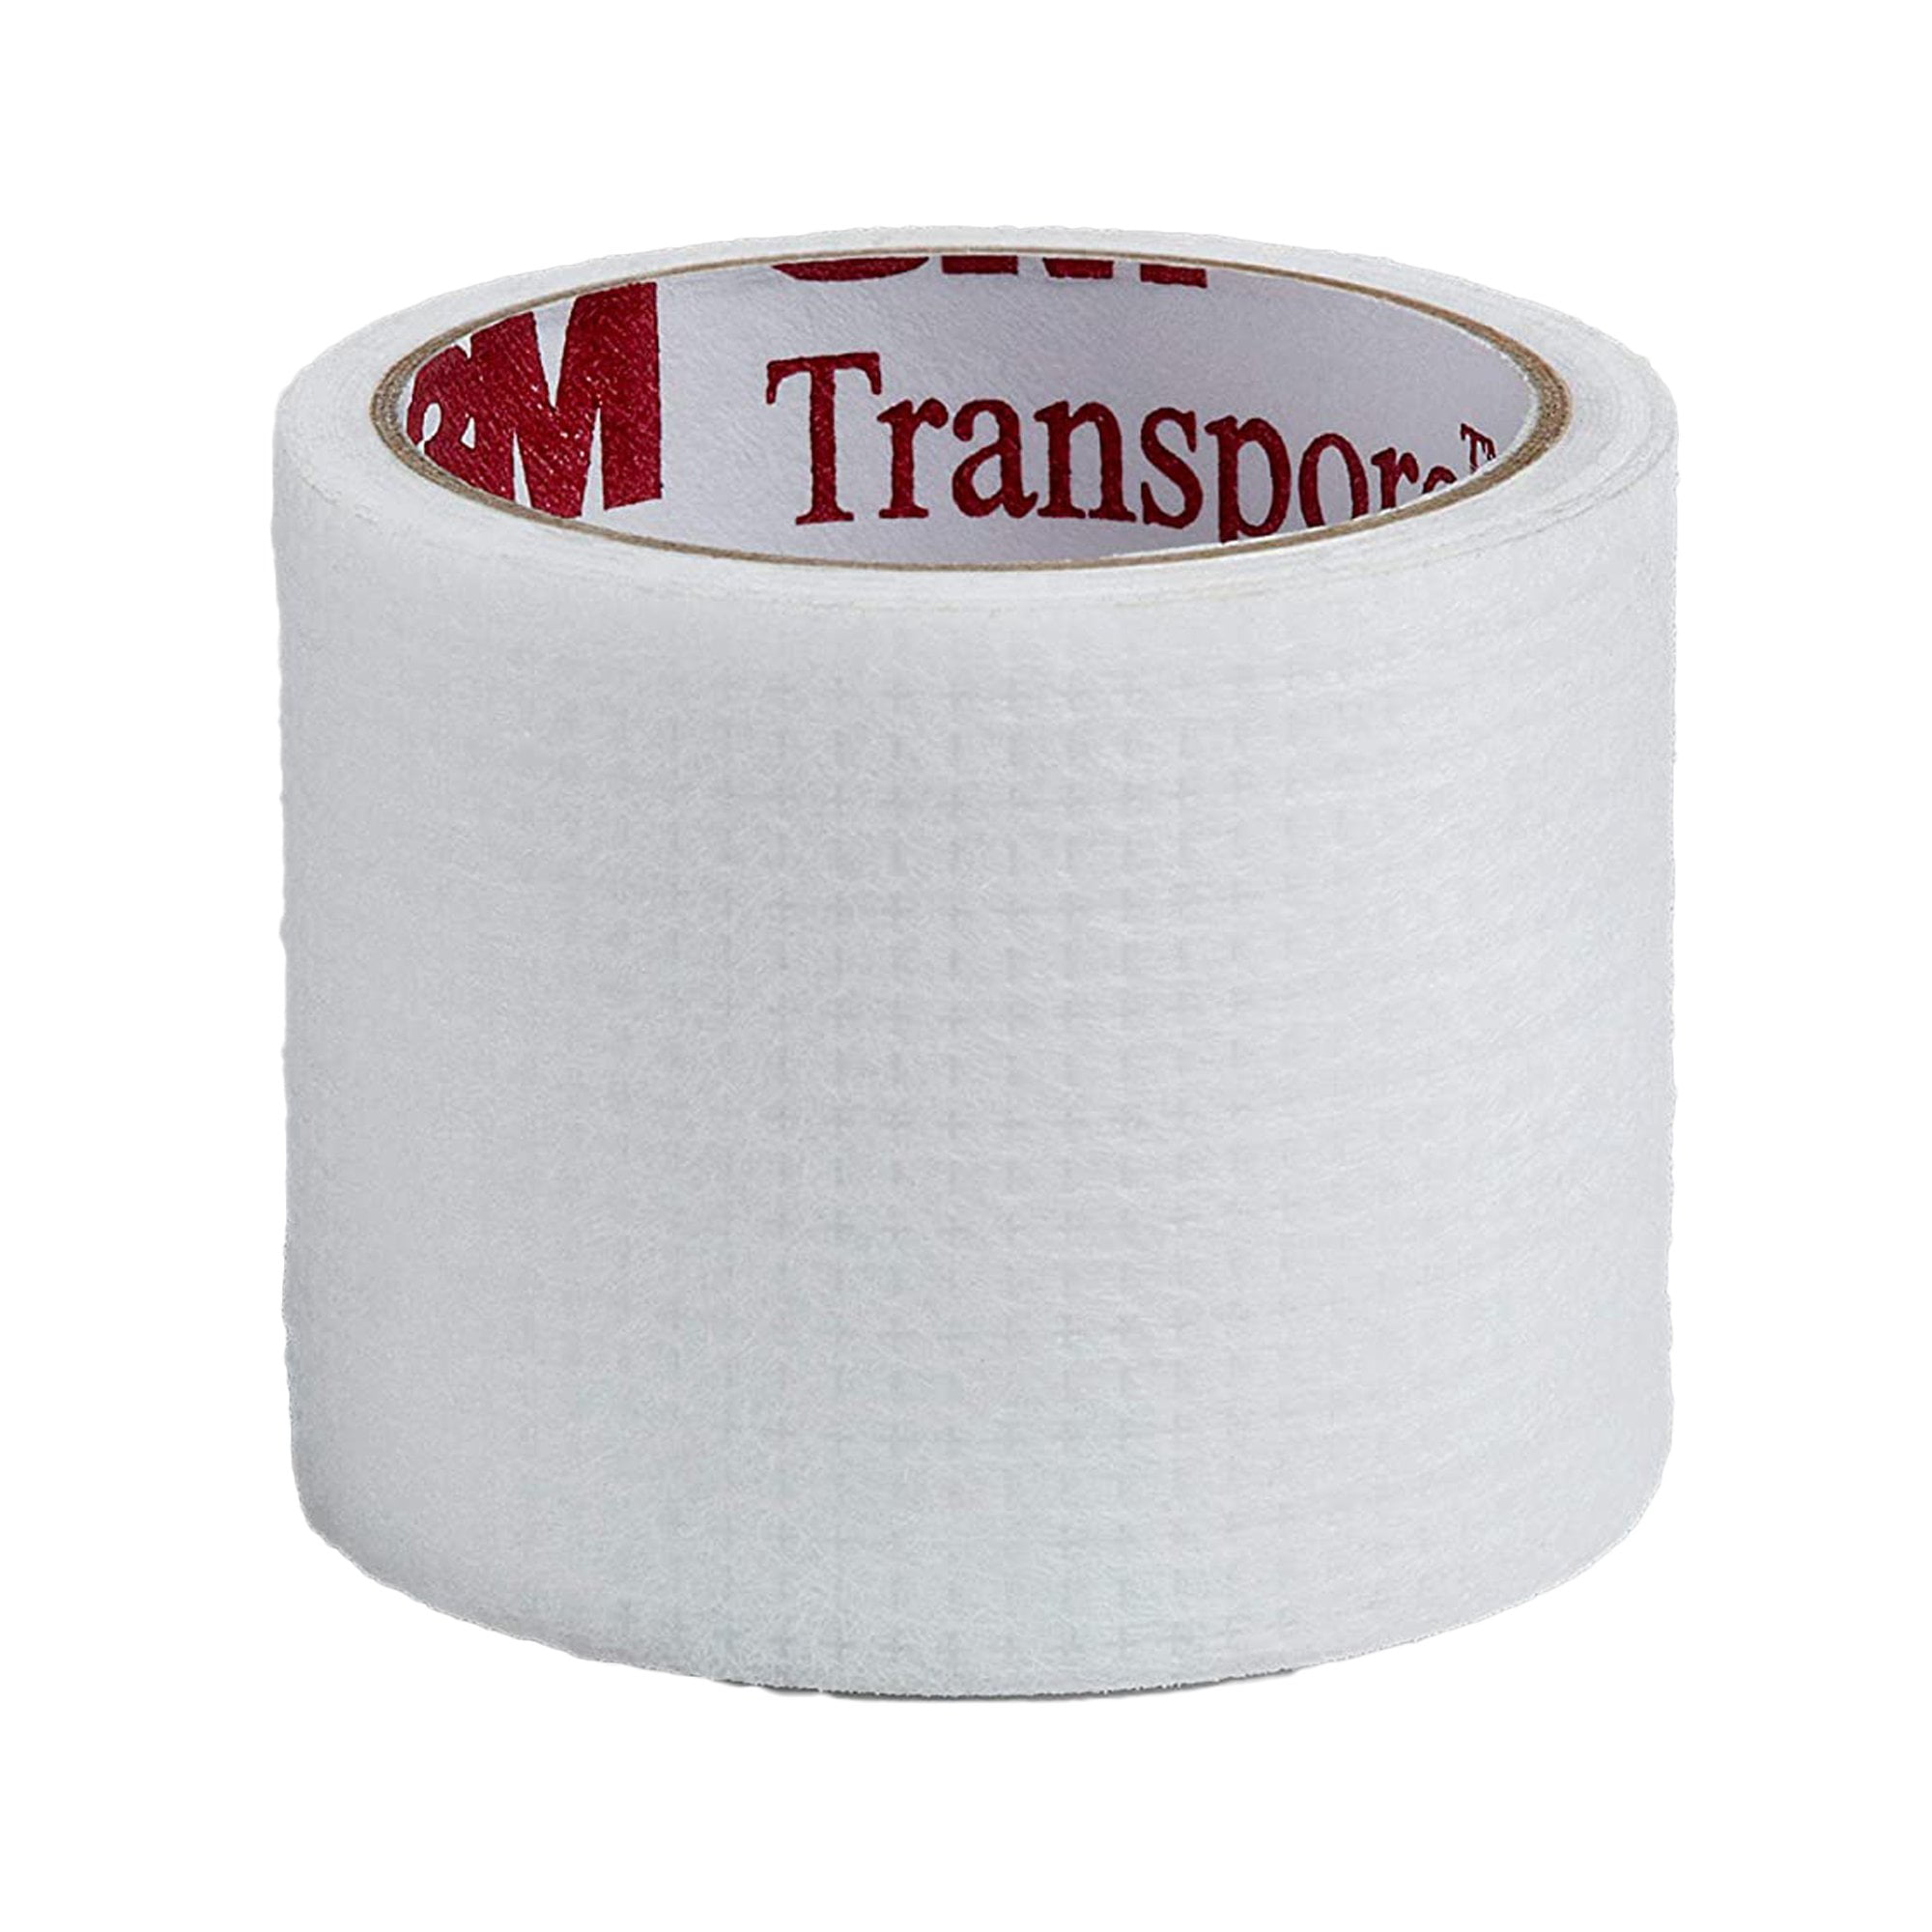 3M Transpore Surgical Tape - 1/2 x 10 yds